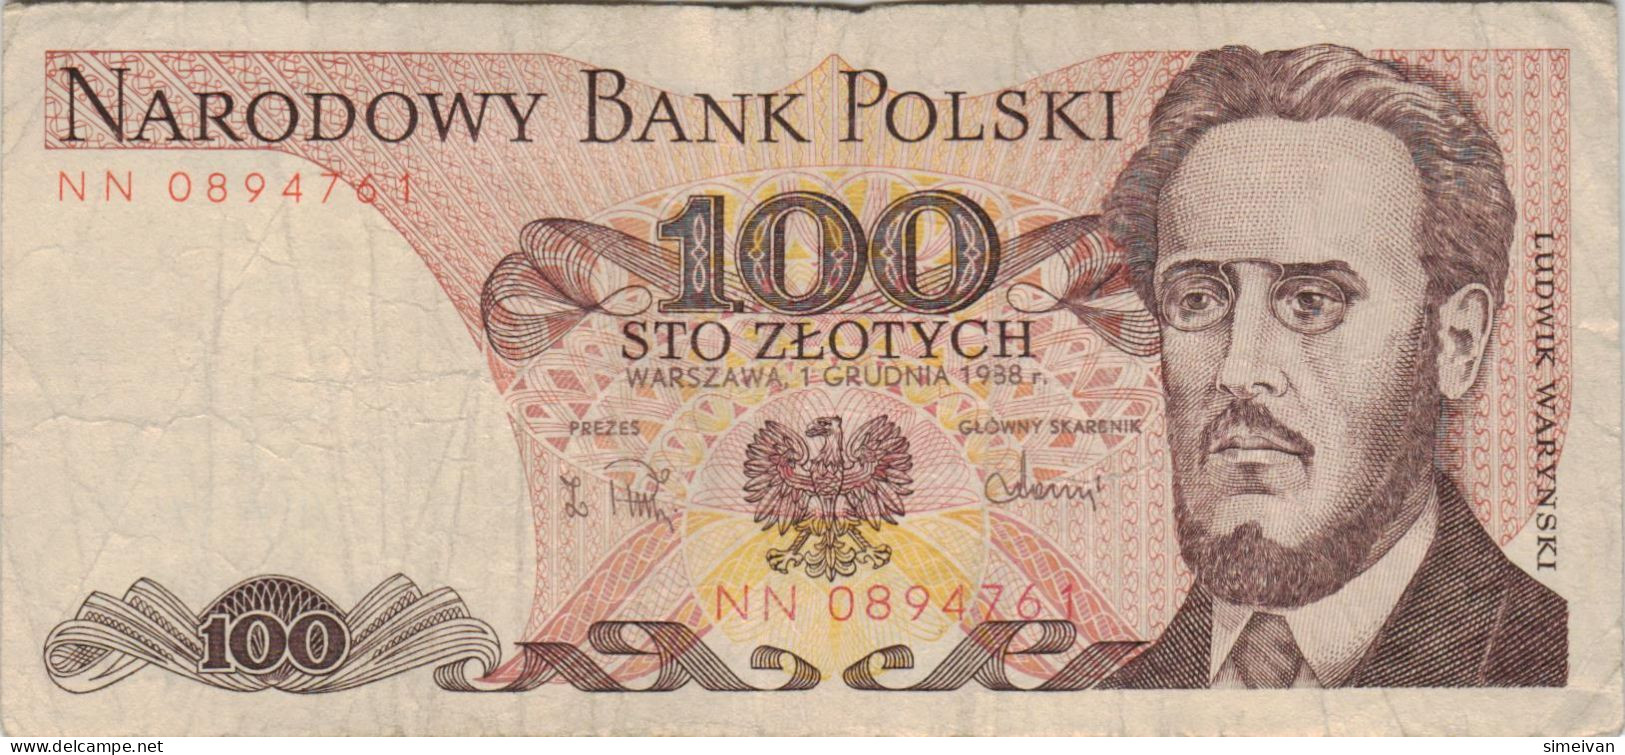 Poland 100 Zlotych 1988 P-143e Banknote Europe Currency Pologne Polen #5306 - Pologne